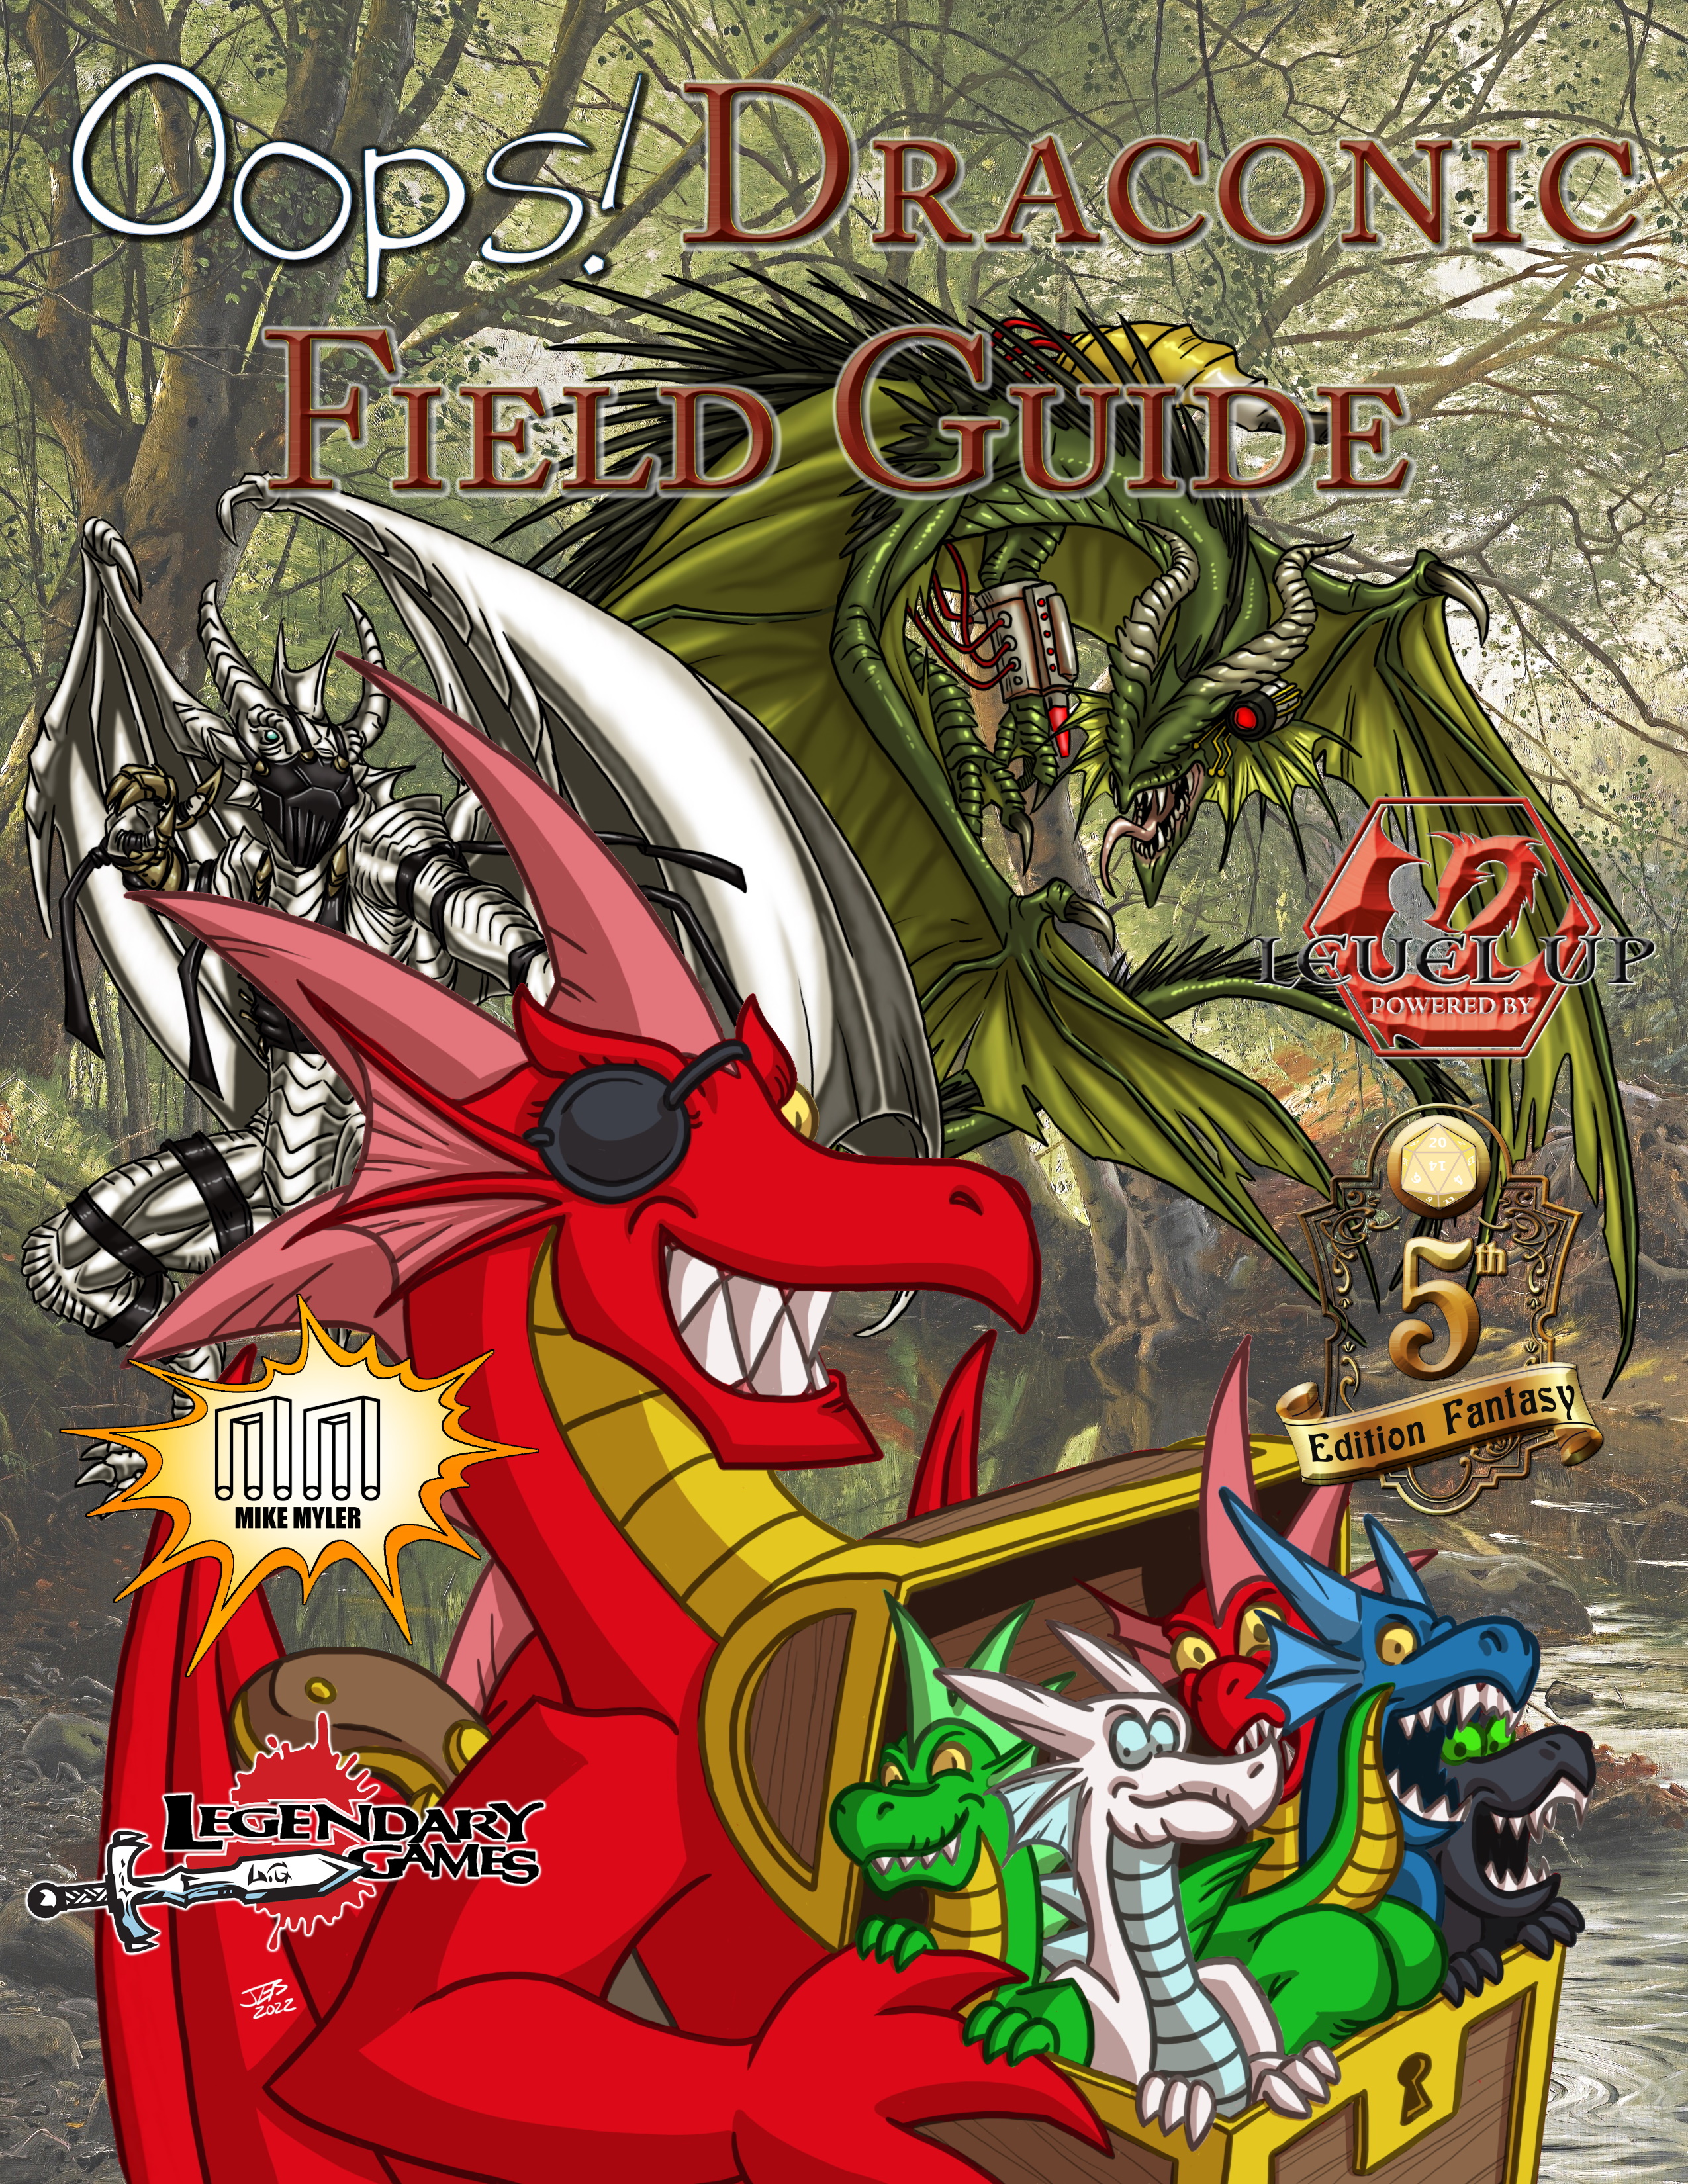 oops draconic field guide cover draft uno.jpg